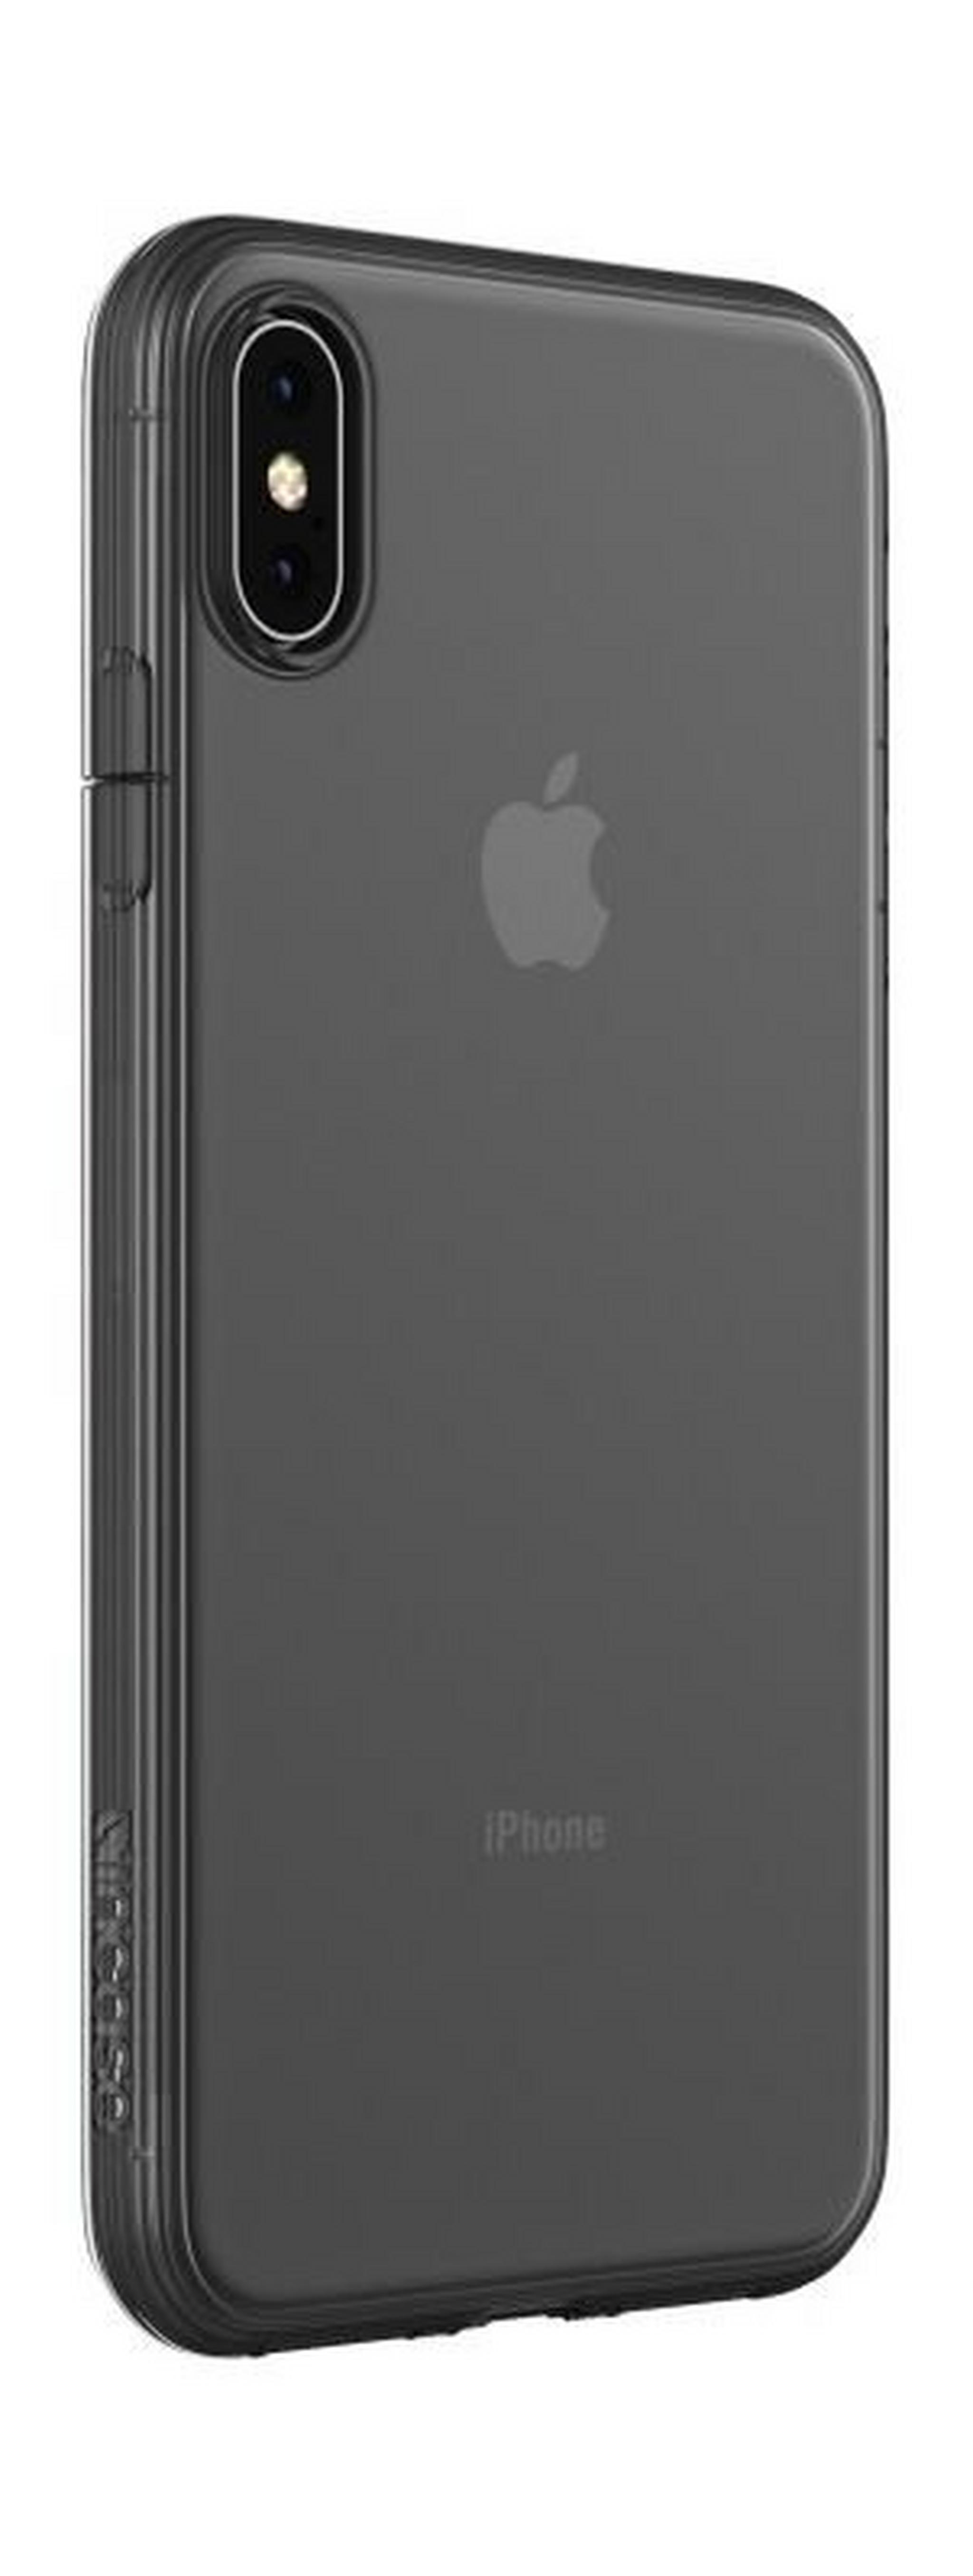 Incase Protective Case For iPhone XS Max (INPH220553) - Black